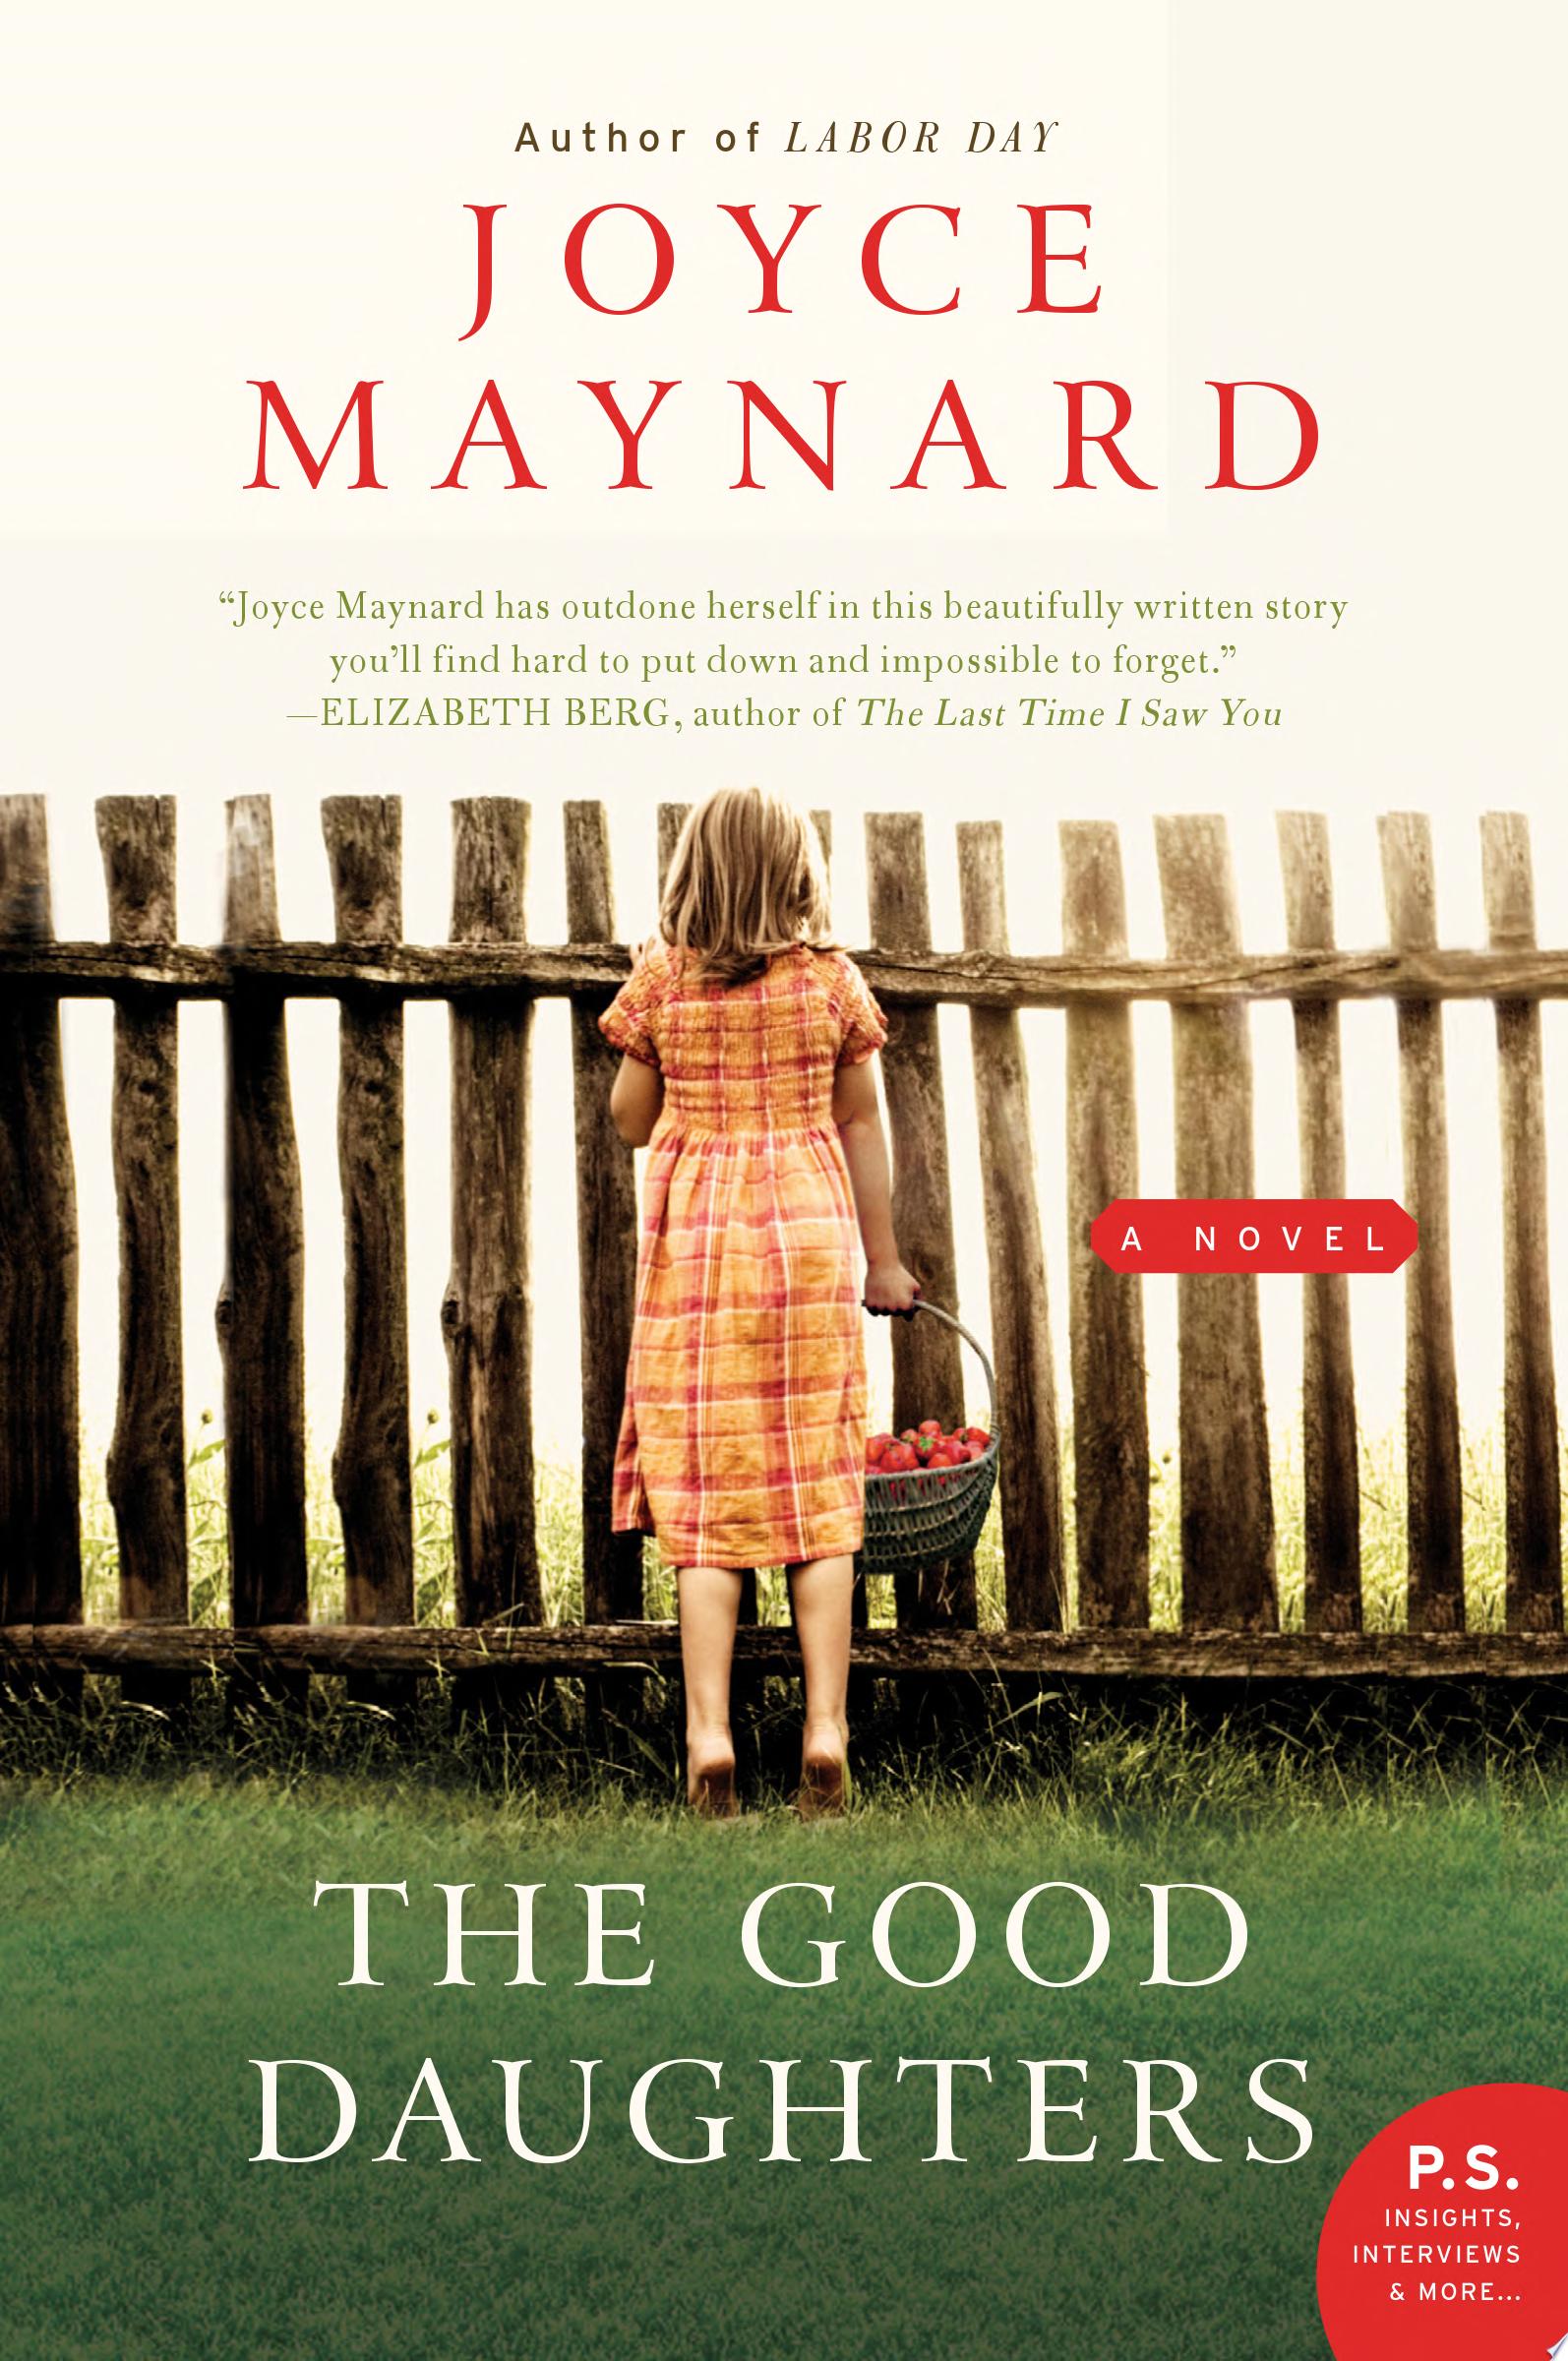 Image for "The Good Daughters"